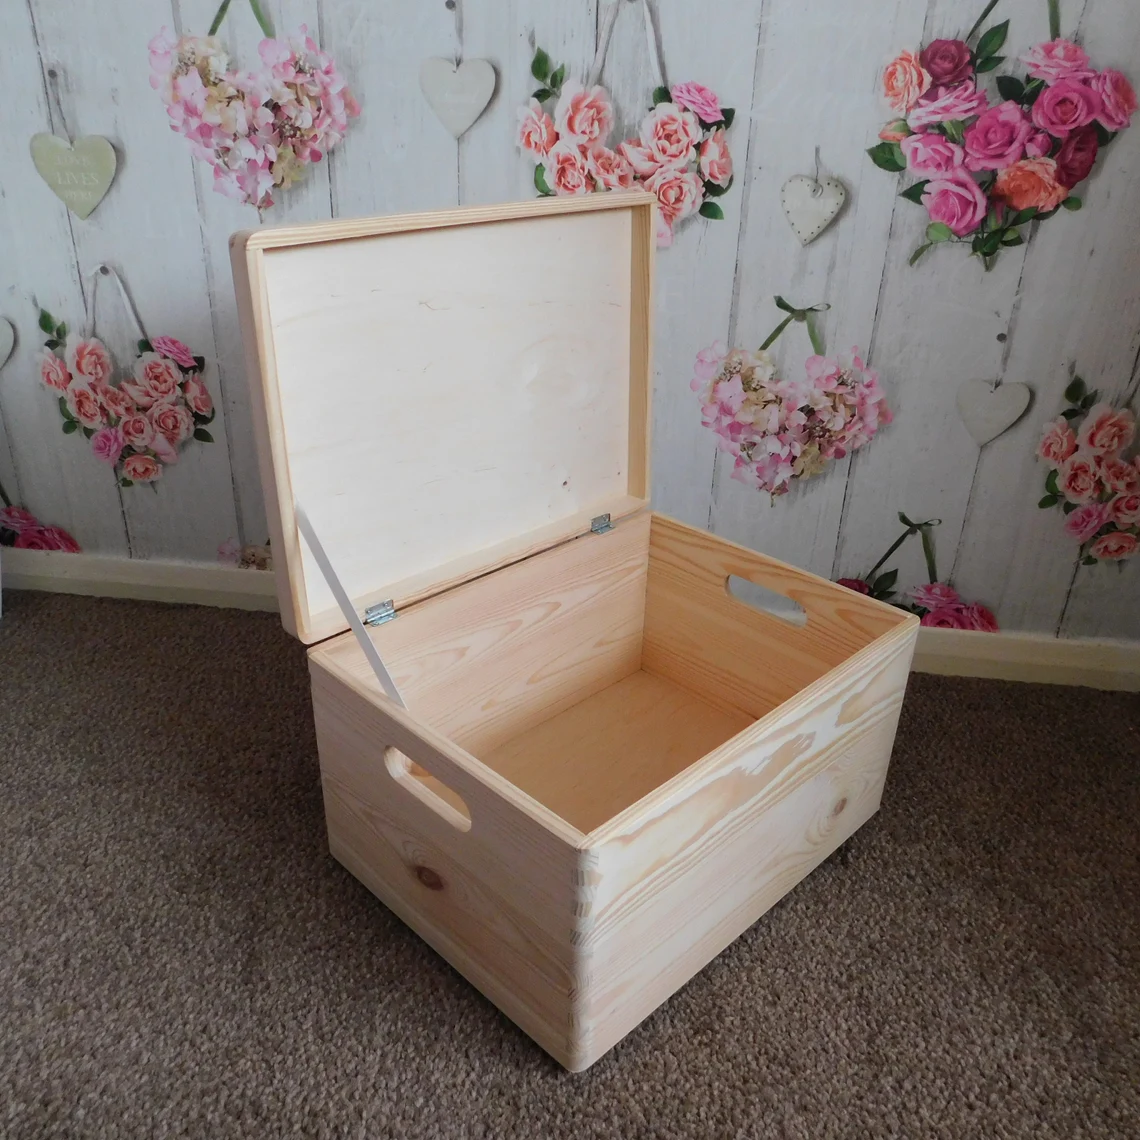 Large Plain Wooden Storage Box With Hinged Lid & Handles - Open Box Angled